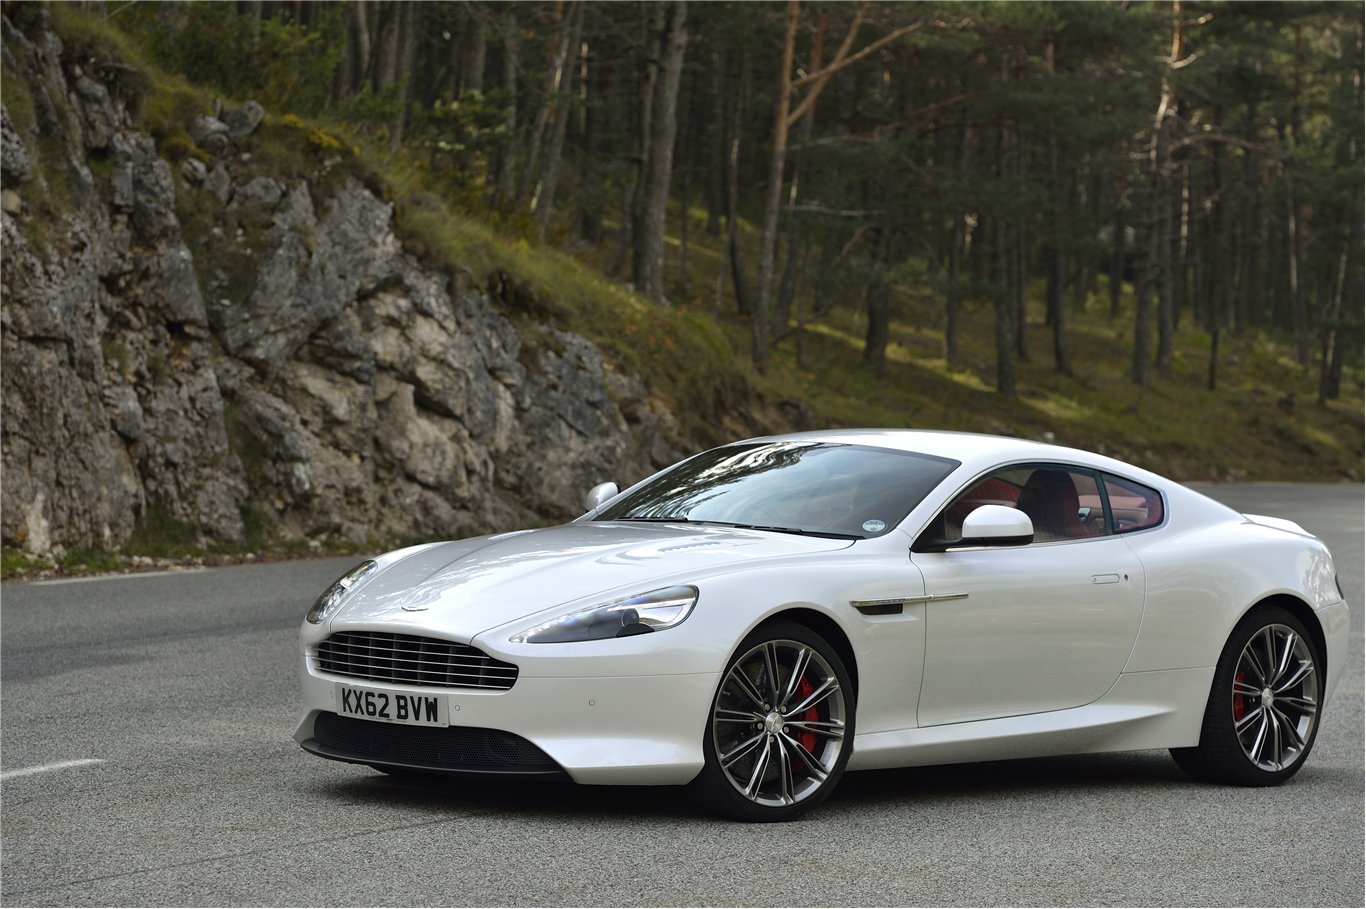 Aston Martin DB9 Coupe front cross view